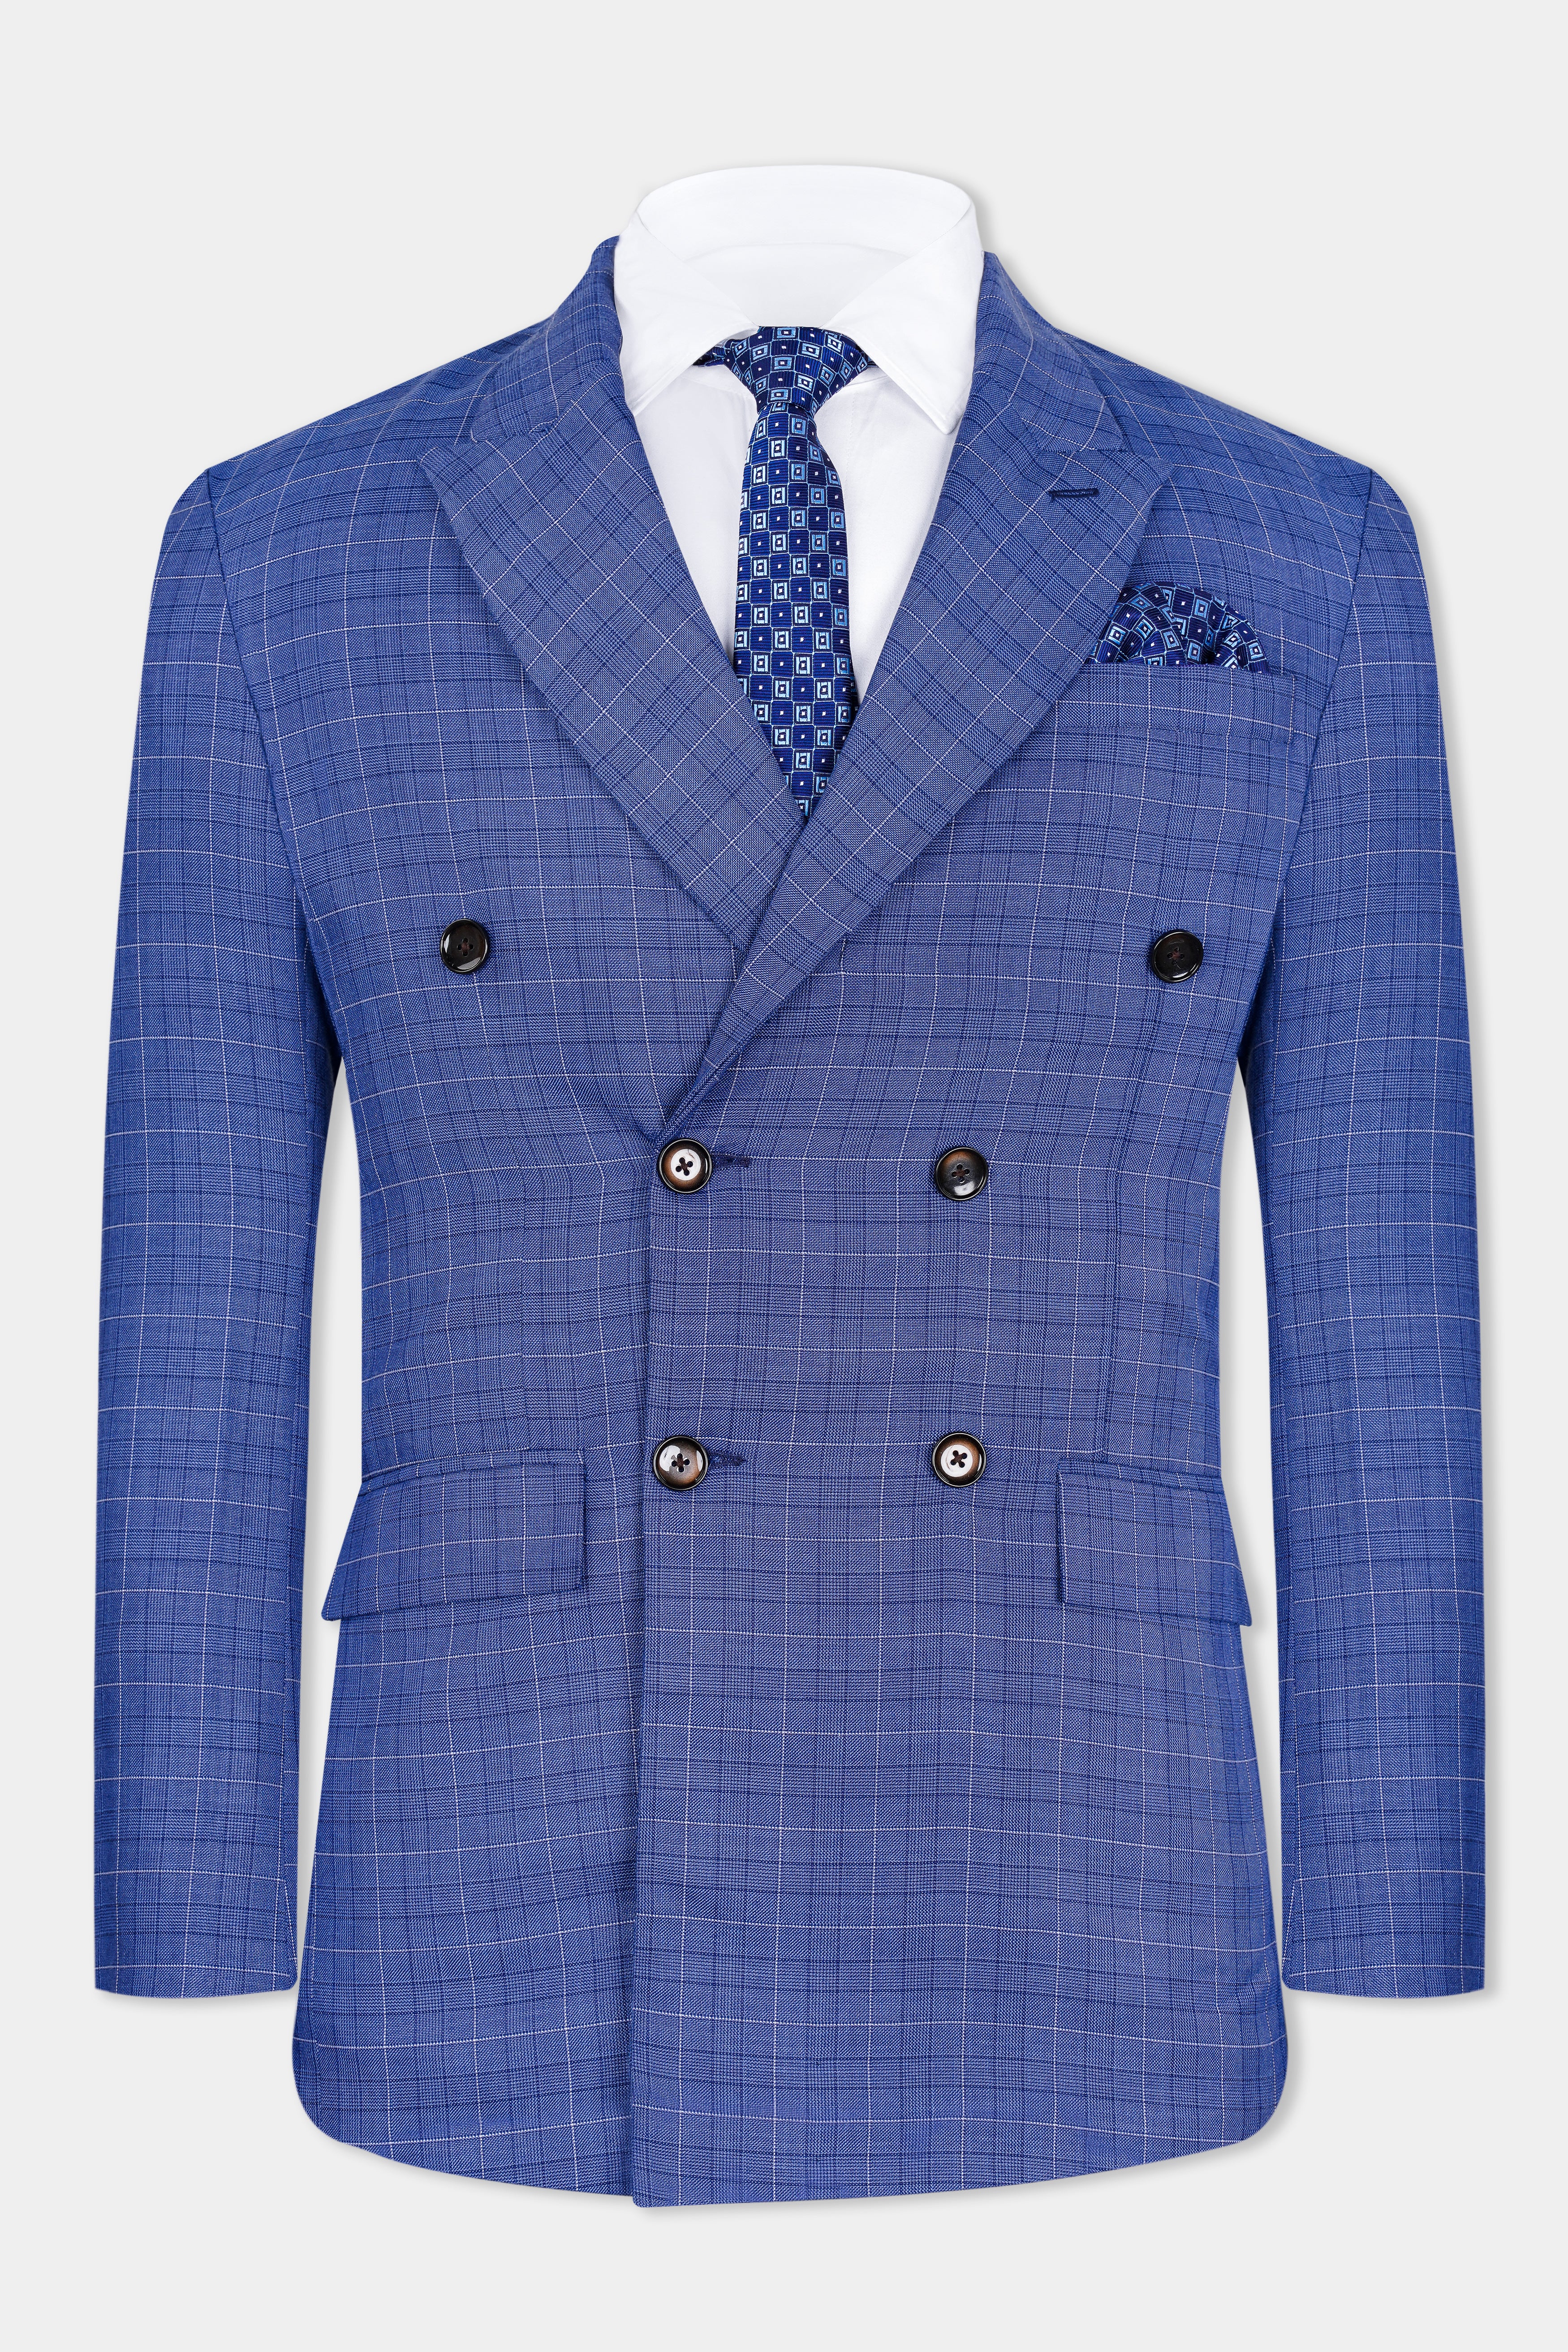 Yonder Blue Plaid Wool Rich Double Breasted Suit ST2944-DB-36,ST2944-DB-38,ST2944-DB-40,ST2944-DB-42,ST2944-DB-44,ST2944-DB-46,ST2944-DB-48,ST2944-DB-50,ST2944-DB-52,ST2944-DB-54,ST2944-DB-56,ST2944-DB-58,ST2944-DB-60